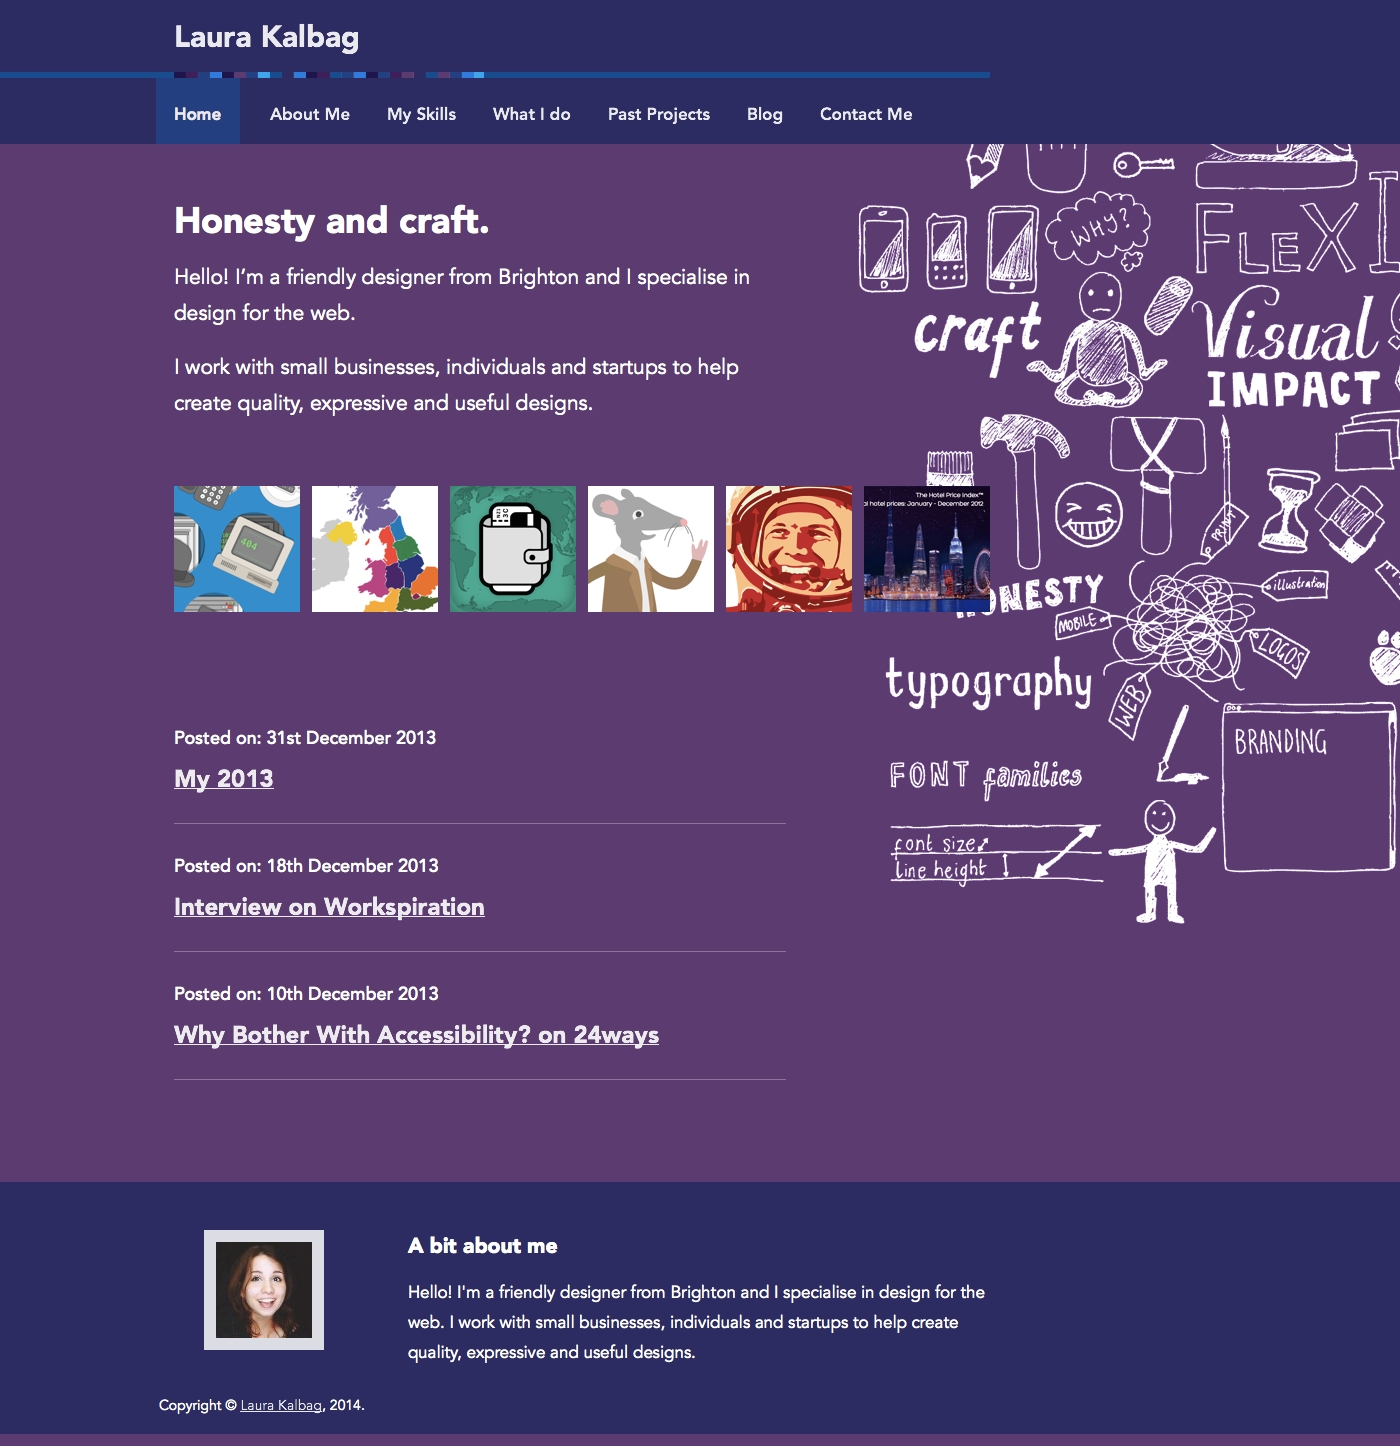 Previous homepage layout, with portfolio images, blog posts and a messy illustration